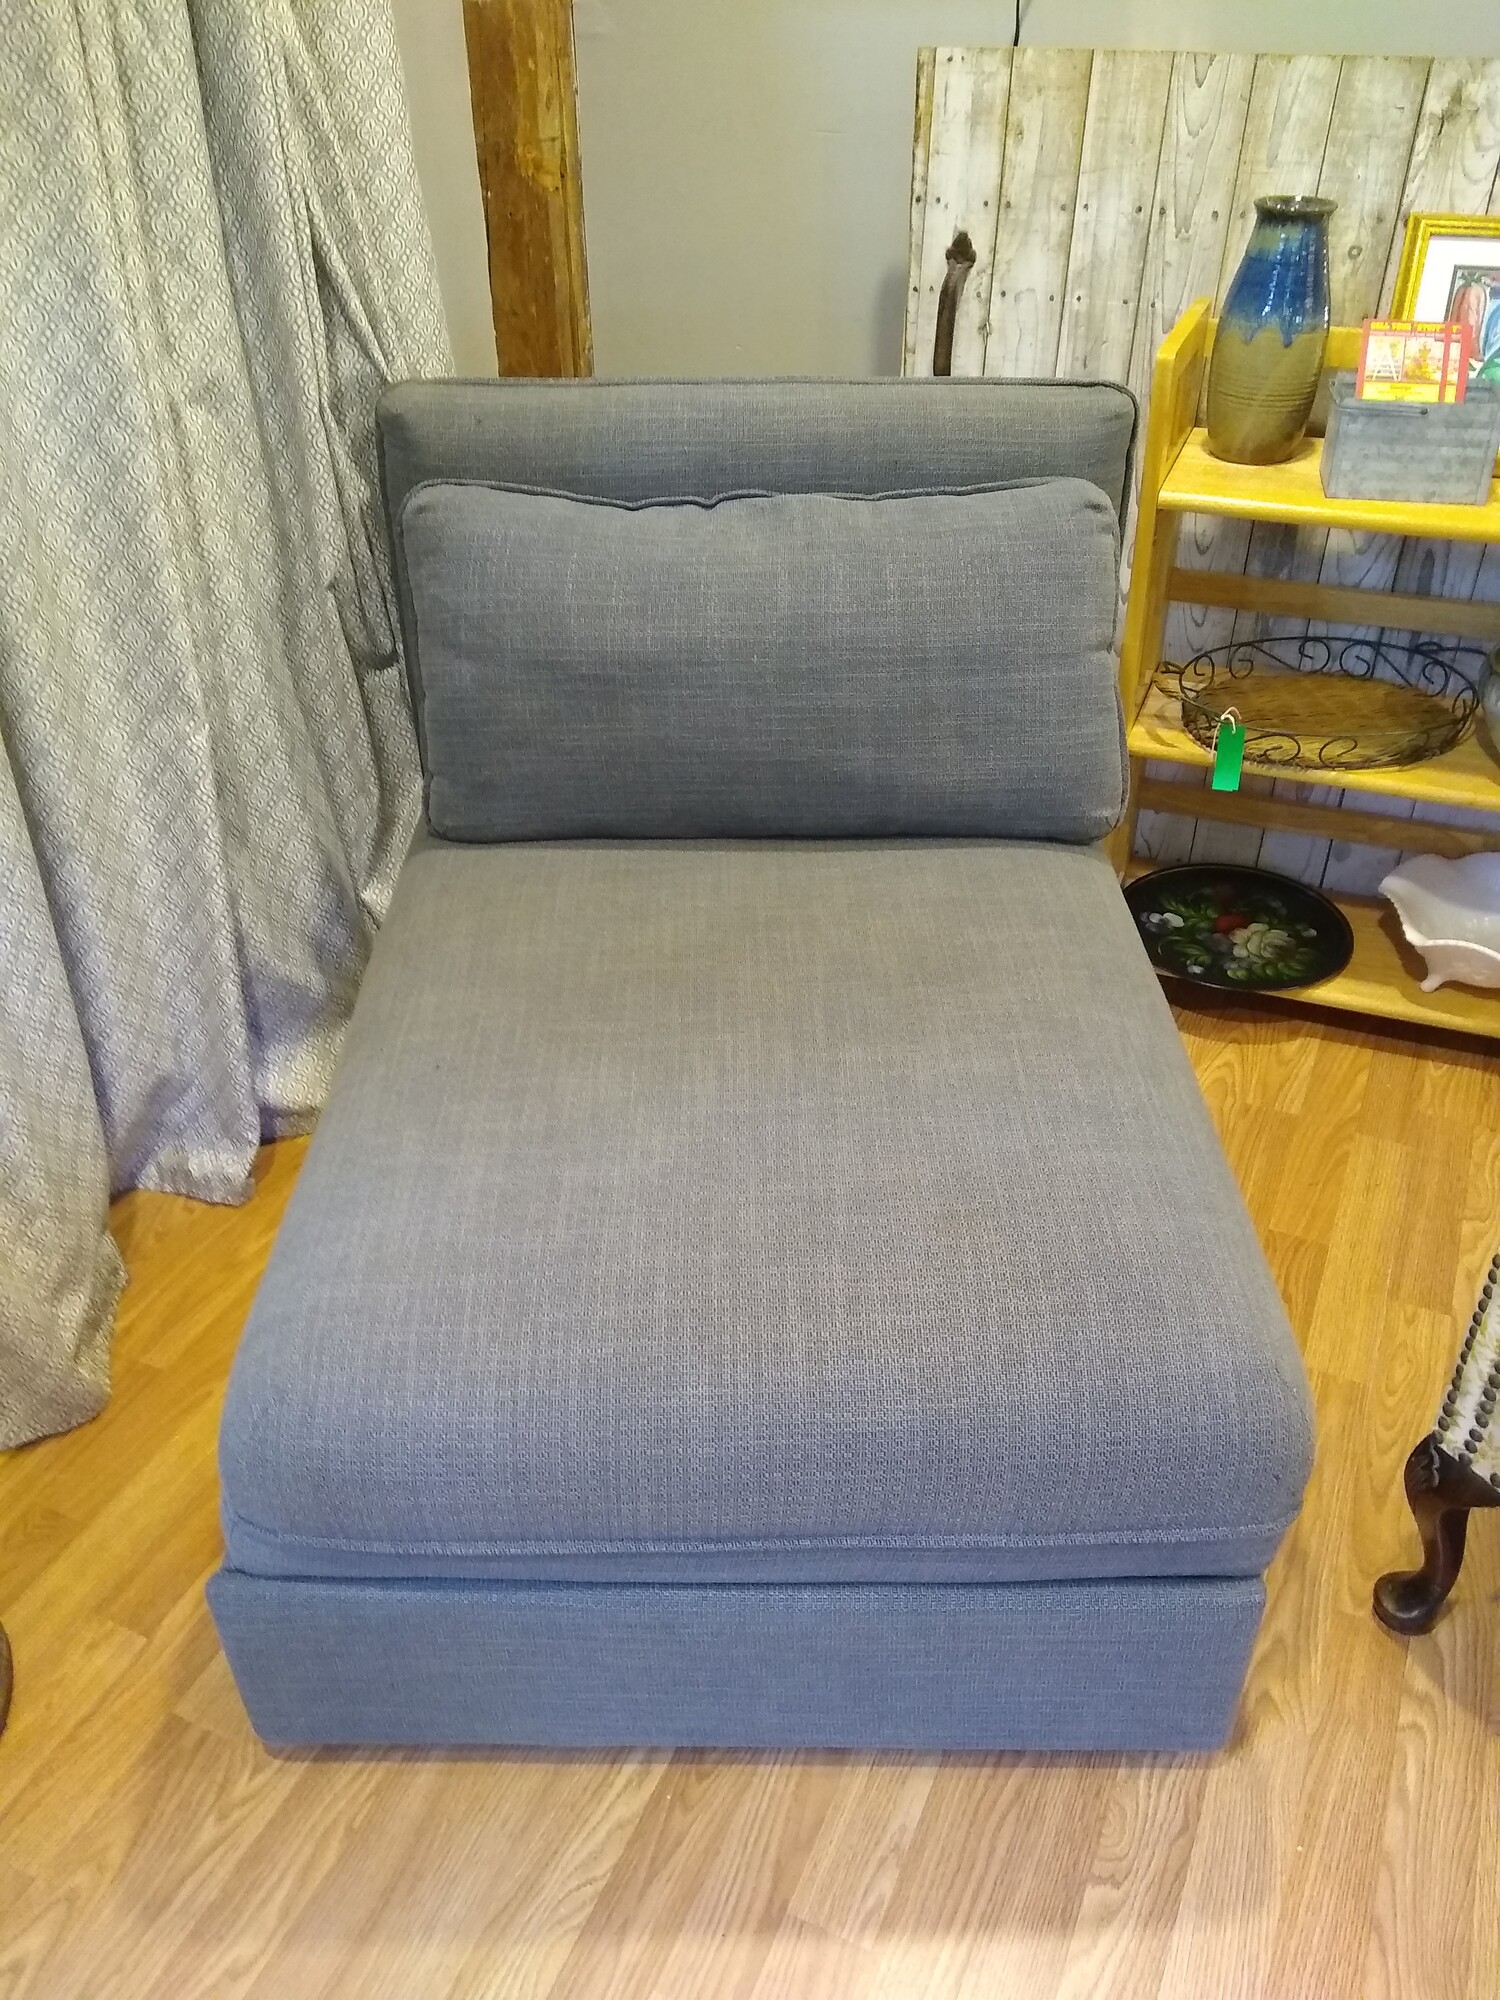 IKEA Blue/Grey ChaiseBed

Like new IKEA chaise which opens to a bed.  Fabric is a blue grey color and is excellent condition. The bottom of the chaise slides out and the cushion upzips to lay flat as a mattreess.  The back is adjustable and can be moved to fit any of the 3 sides of the chair.  Very nice piece!

Closed Size: 44 in deep X 32 in wide X 33 in high at back of chair.
Open Size: 83 in deep X 32 in wide X 33 in high at back of chair